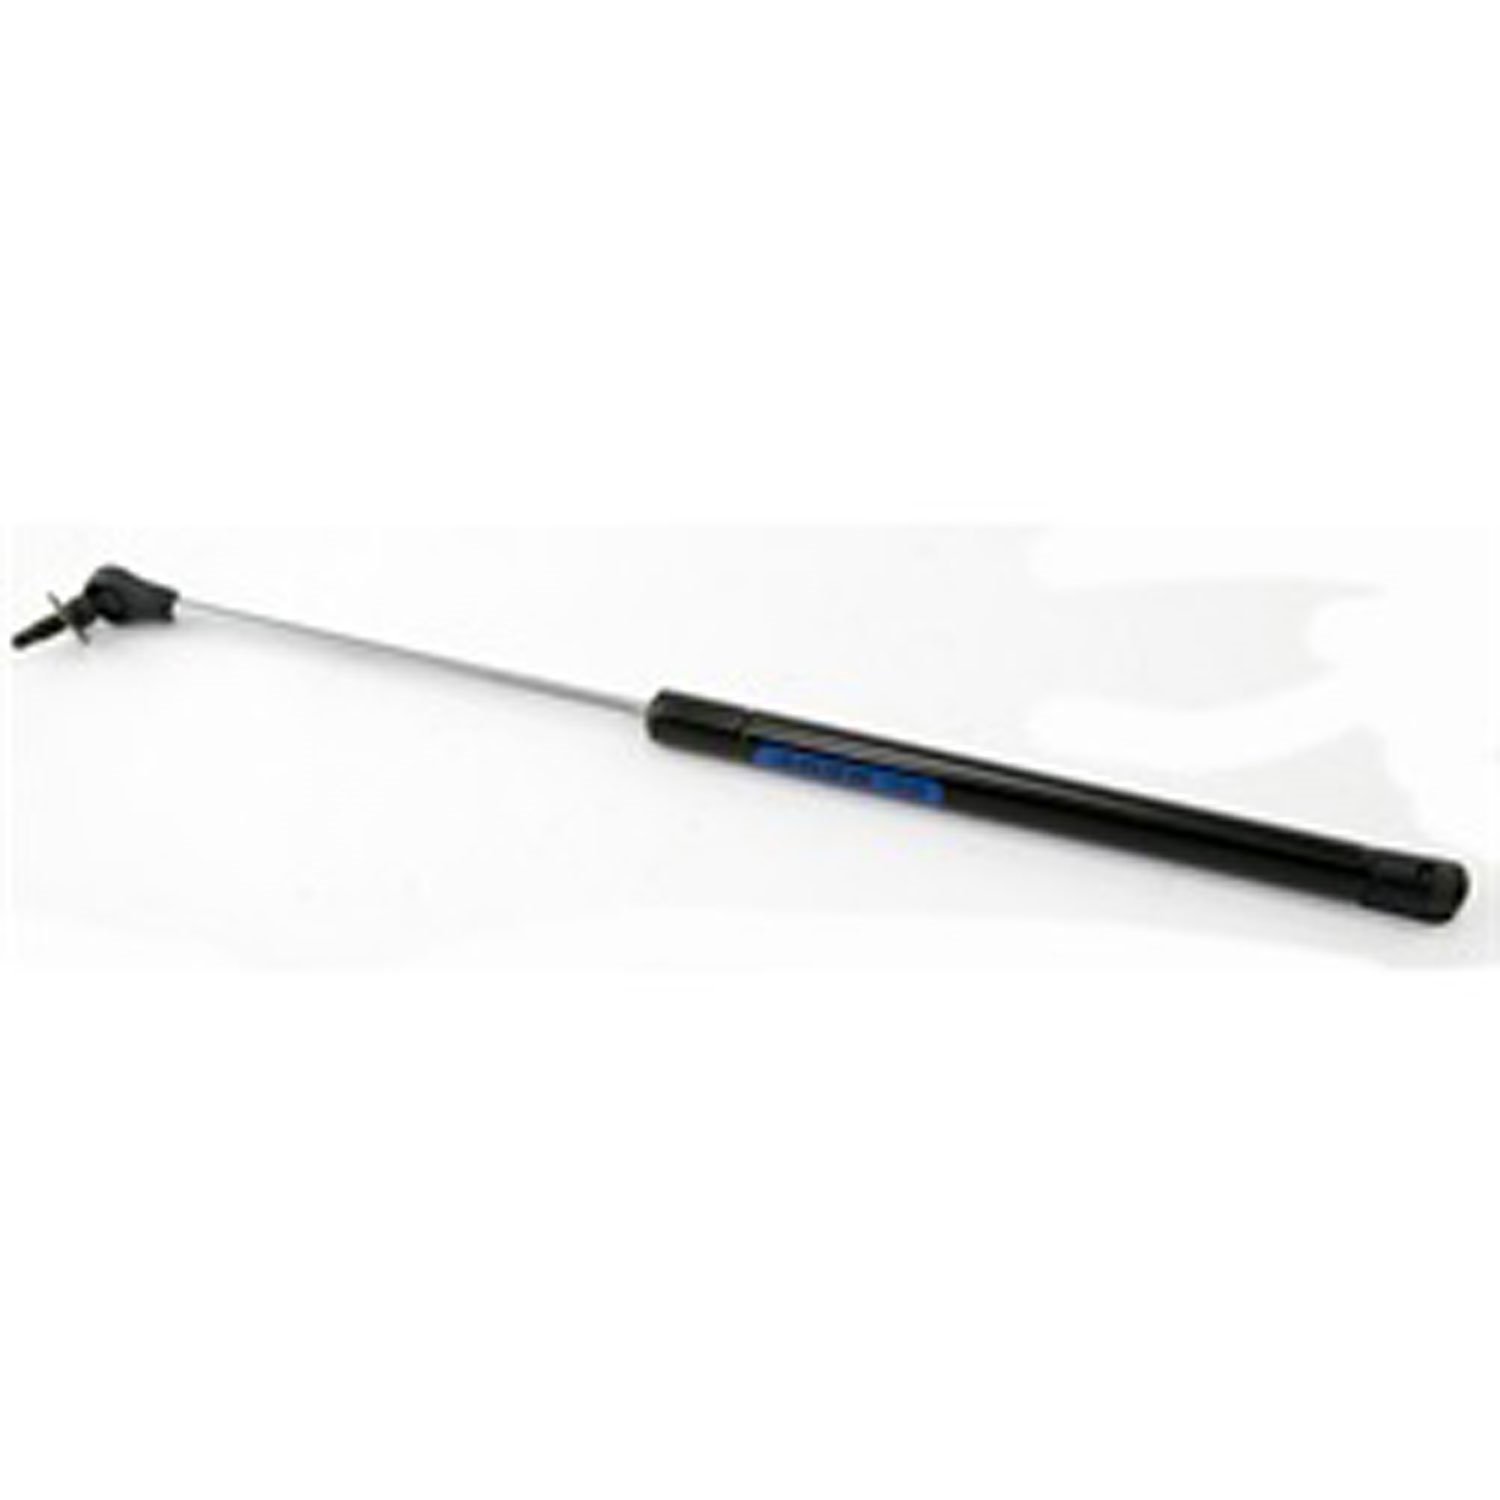 Replacement gas strut from Omix-ADA, Fits liftgate glass rear window on 99-04 Jeep Grand Cherokee WJ